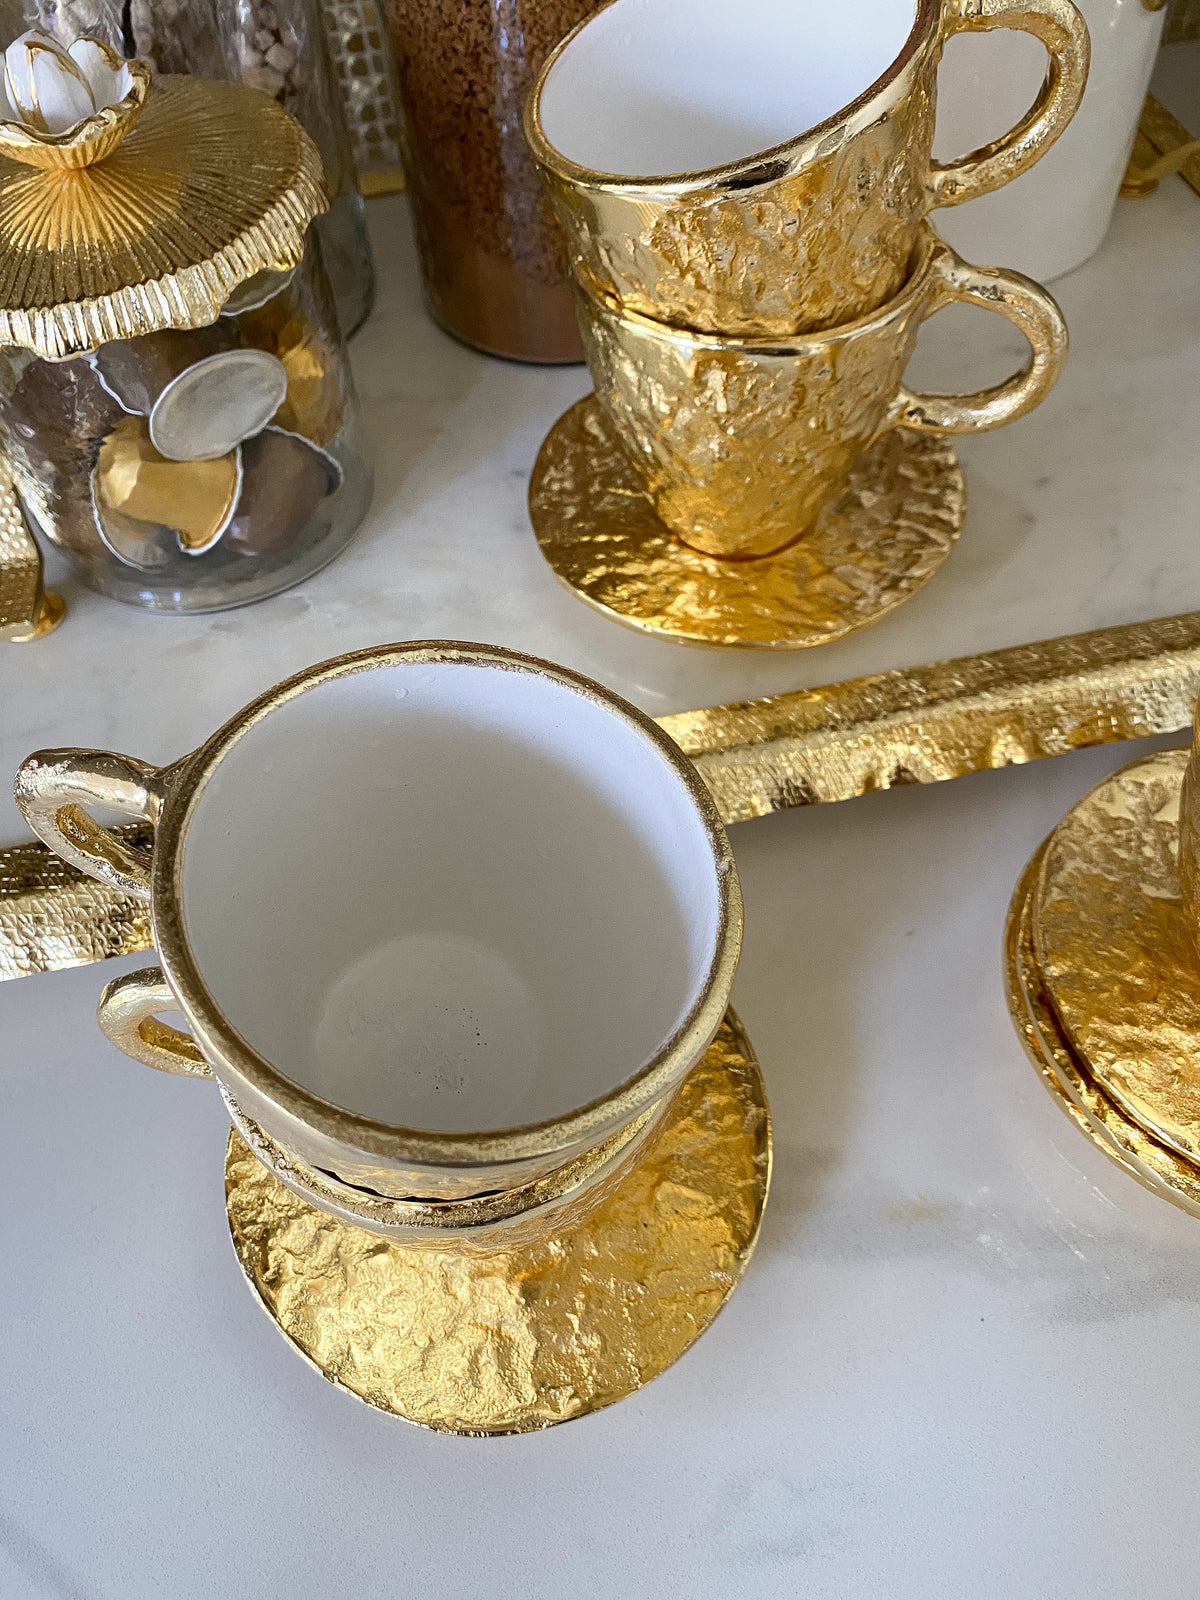 https://www.shopinspiremehomedecor.shop/wp-content/uploads/1693/26/gold-textured-metal-tea-cup-and-saucer-with-white-interior-inspire-me-home-decor-explore-a-world-of-possibilities-take-a-look-at-our-extensive-selection_3.jpg